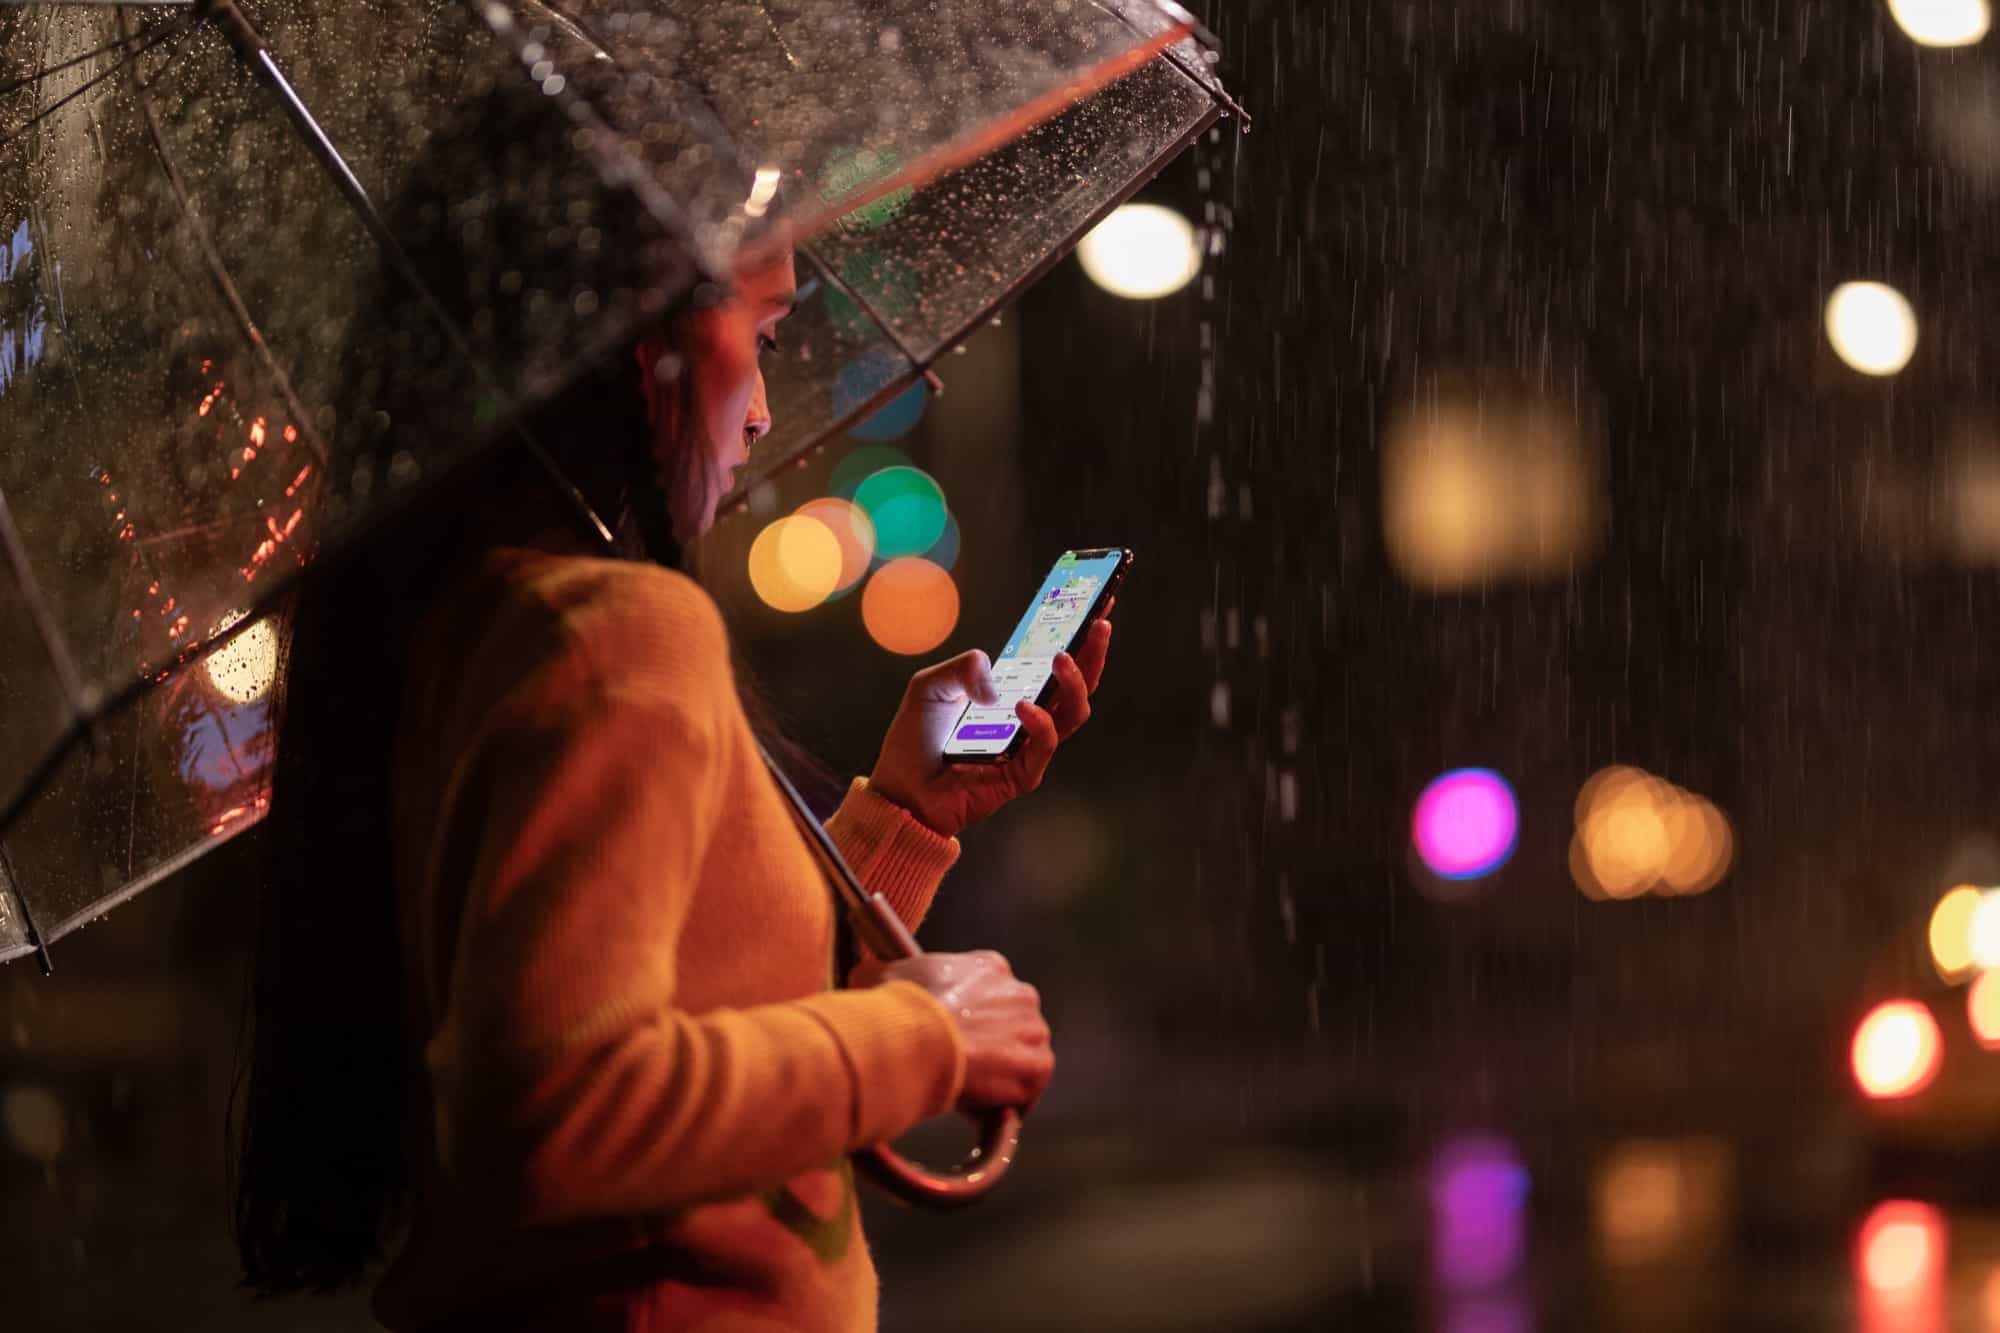 Any of the new iPhones can handle the worst rainstorm.